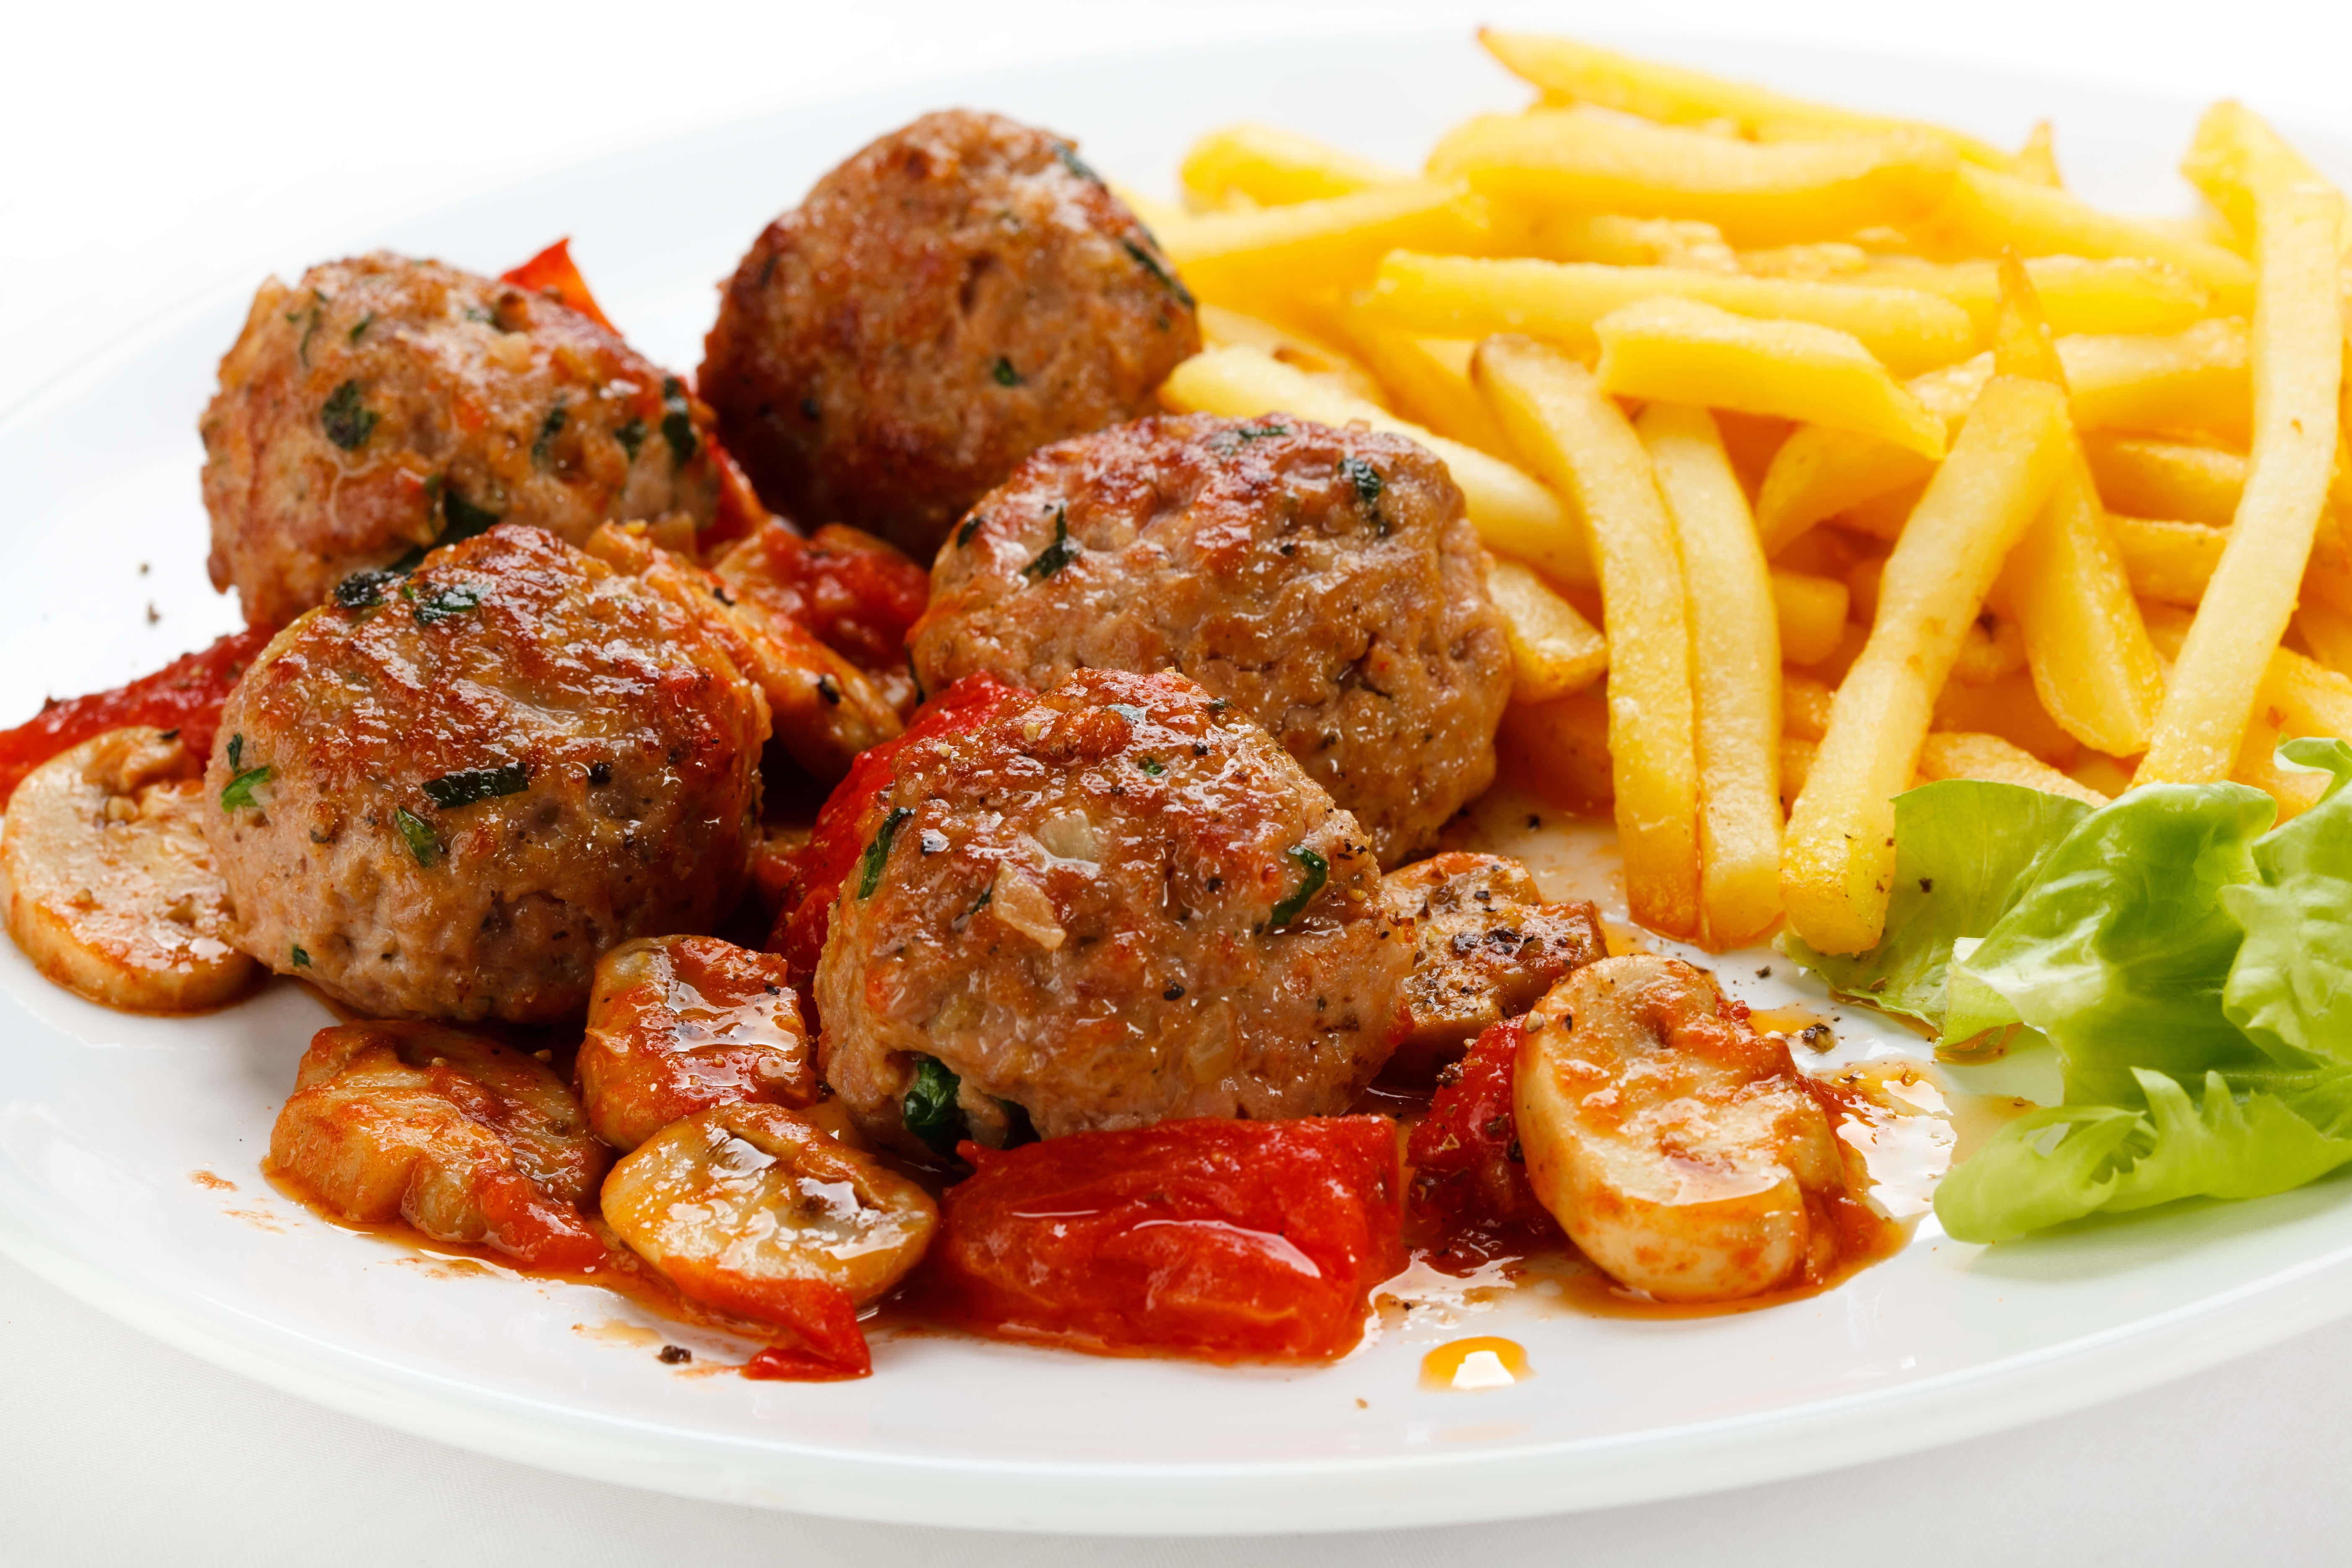 meatballs with fries, potatoes, mushrooms, plate, white background